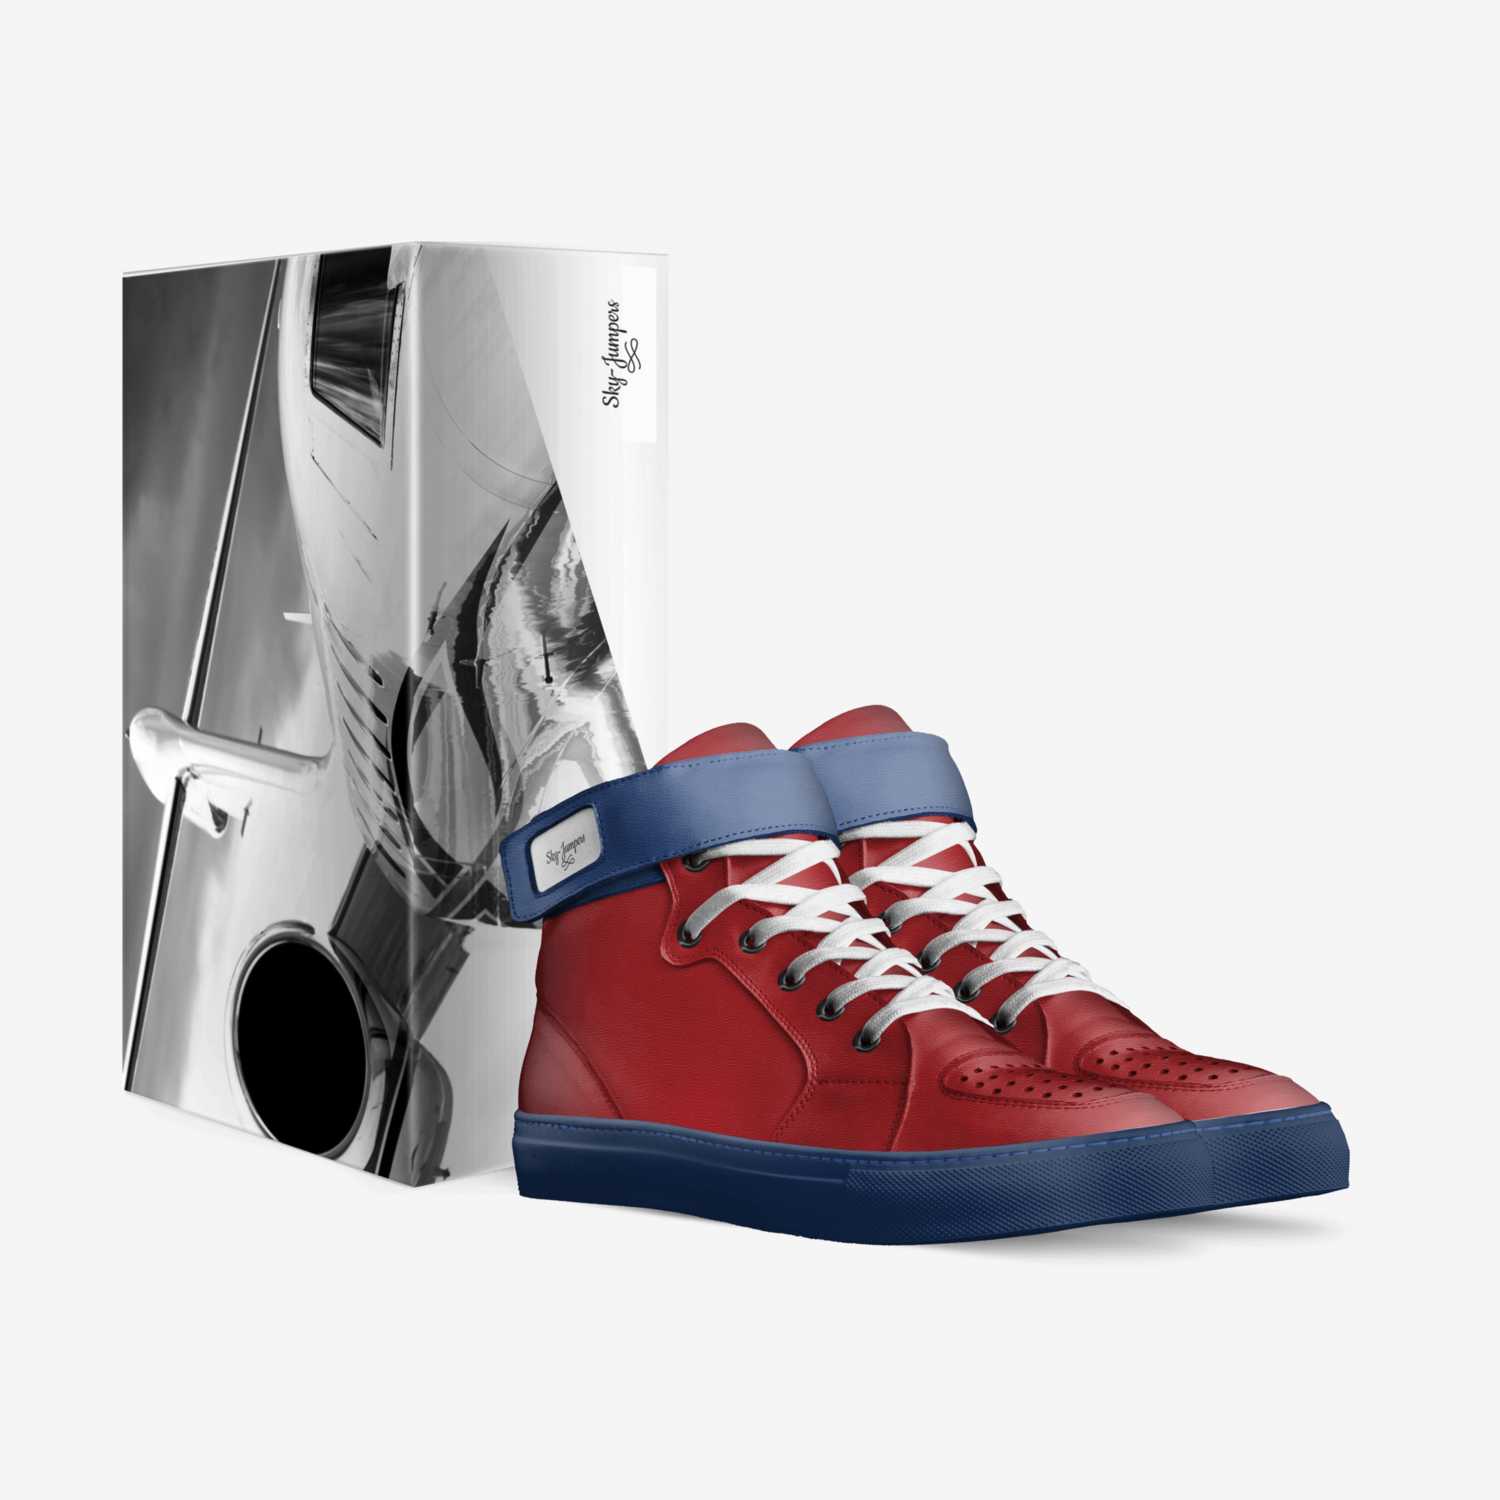 Sky-Jumpers custom made in Italy shoes by Jads | Box view